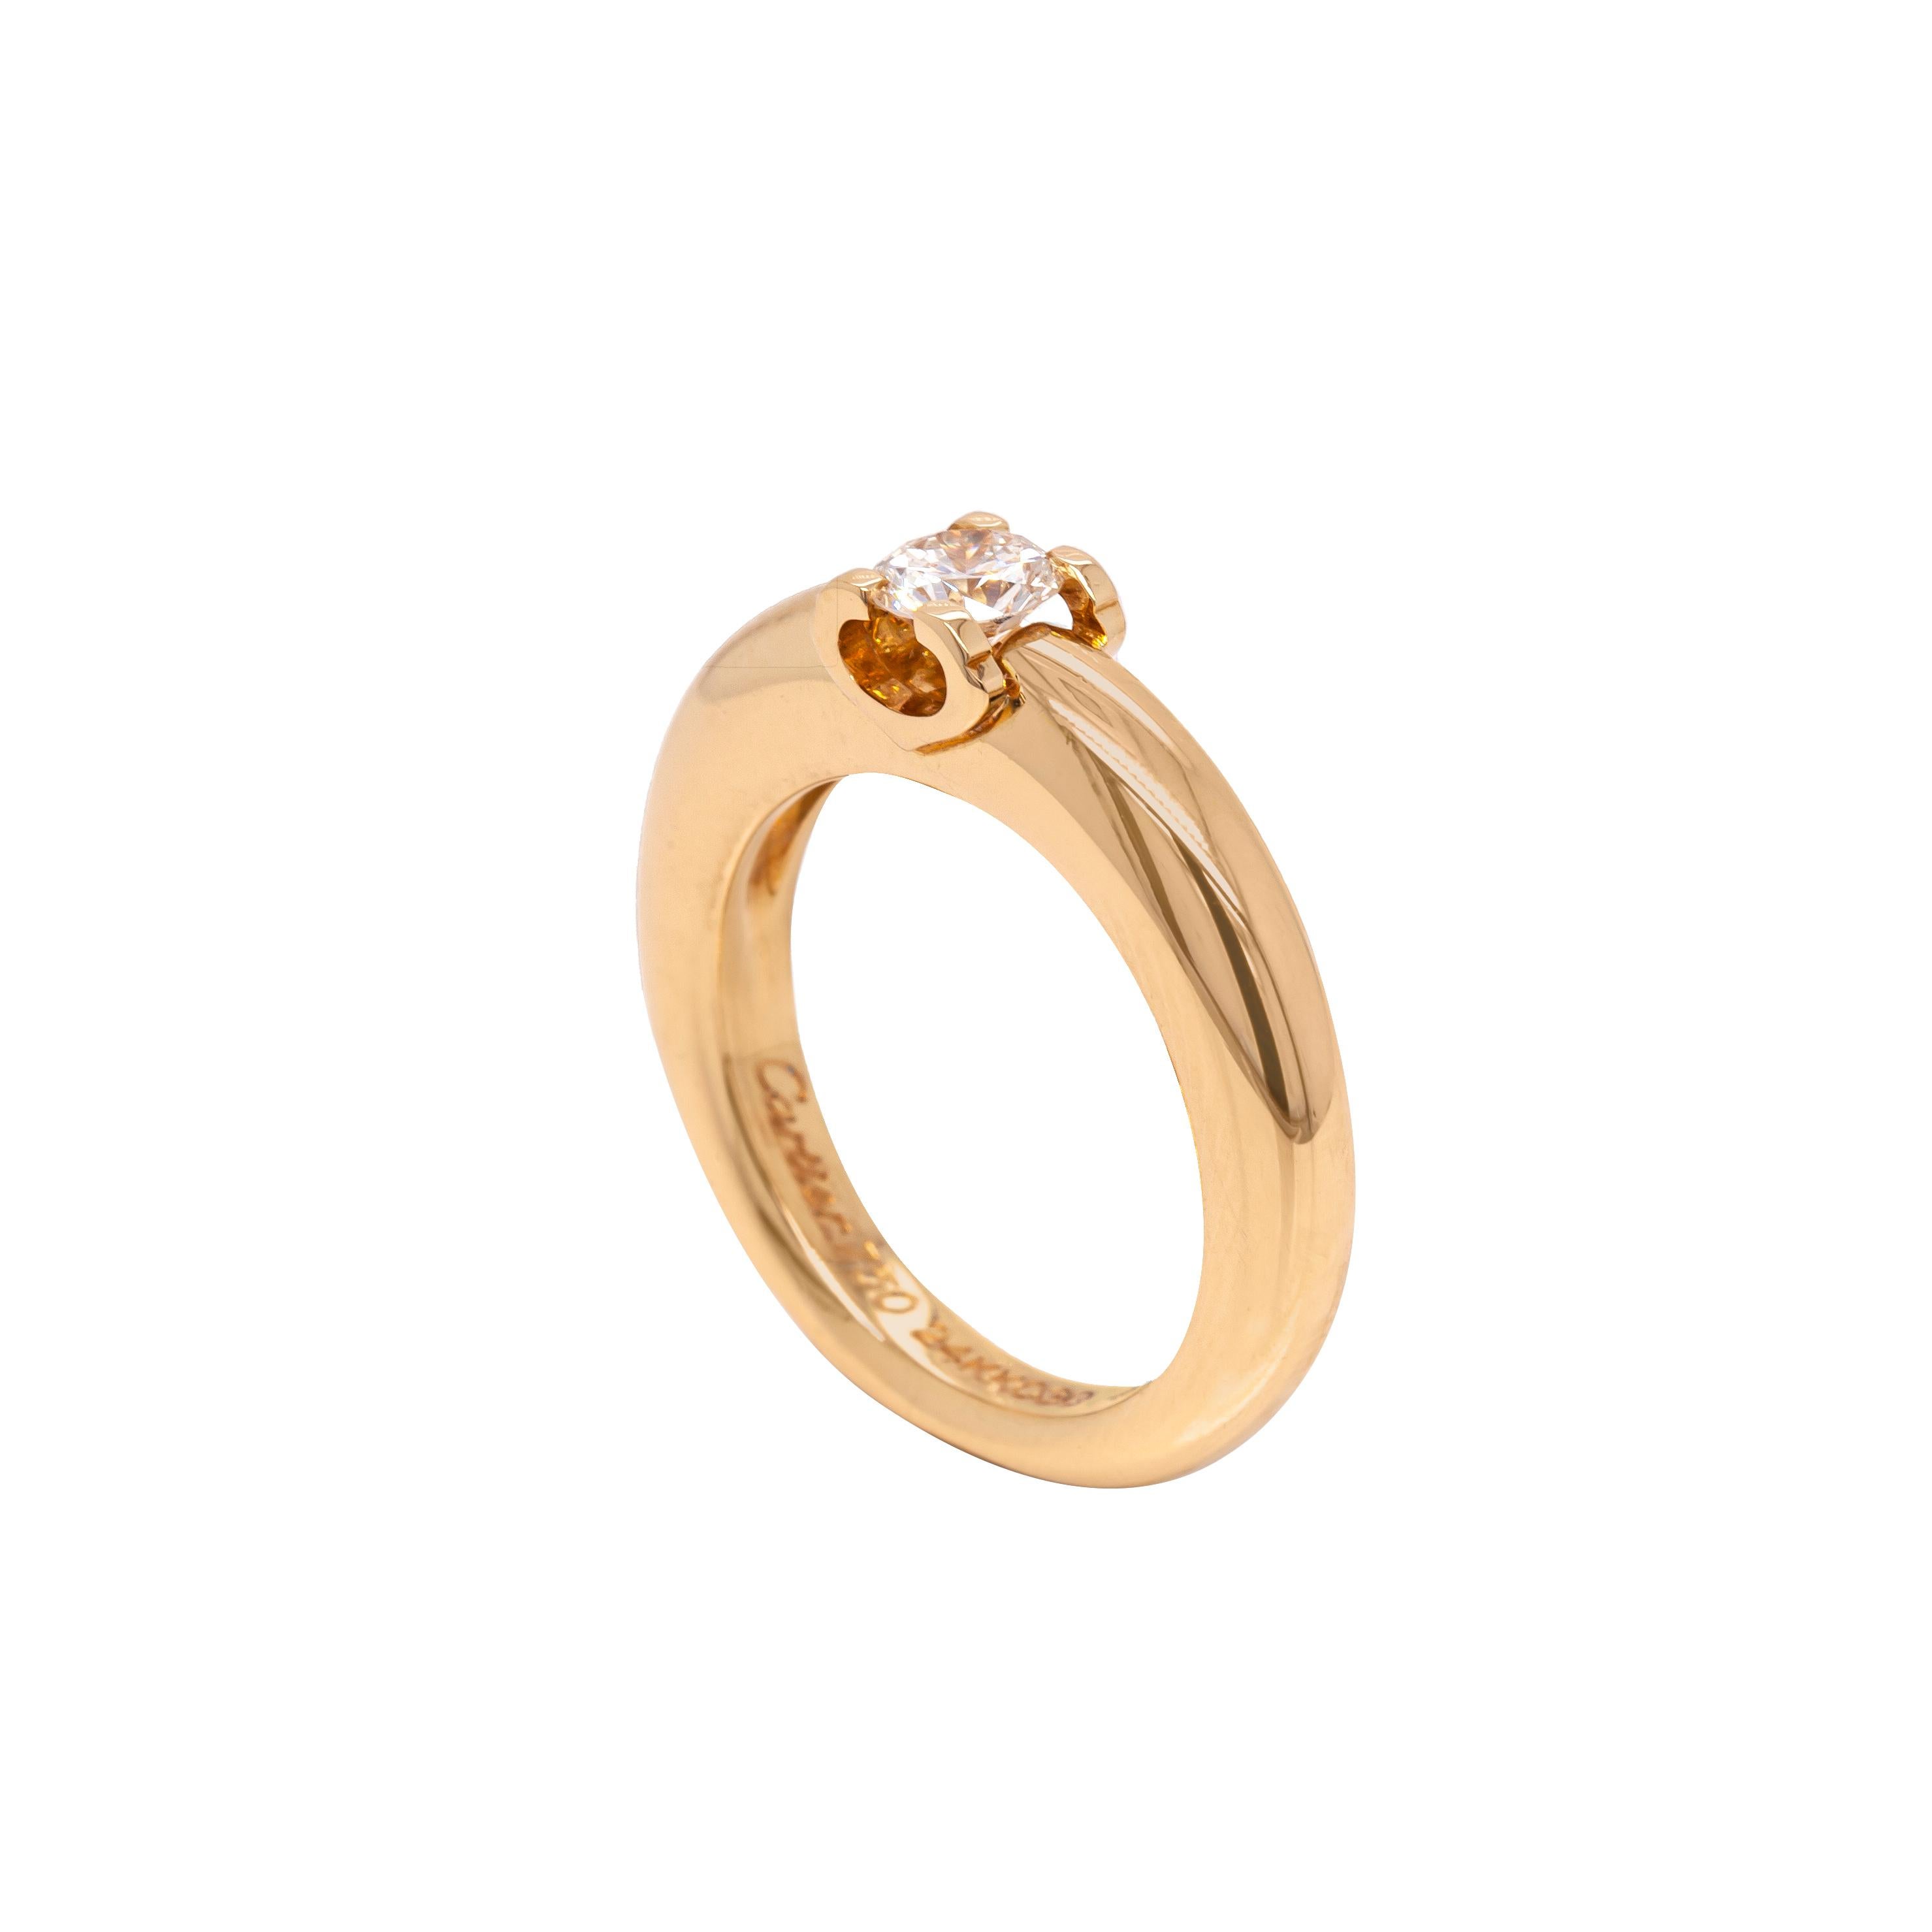 Stunning in its simplicity, this Cartier engagement ring from the 'C de Cartier' Collection is expertly crafted from 18 carat yellow gold. A beautiful round brilliant cut solitaire diamond weighing approximately 0.30ct, makes a statement in the